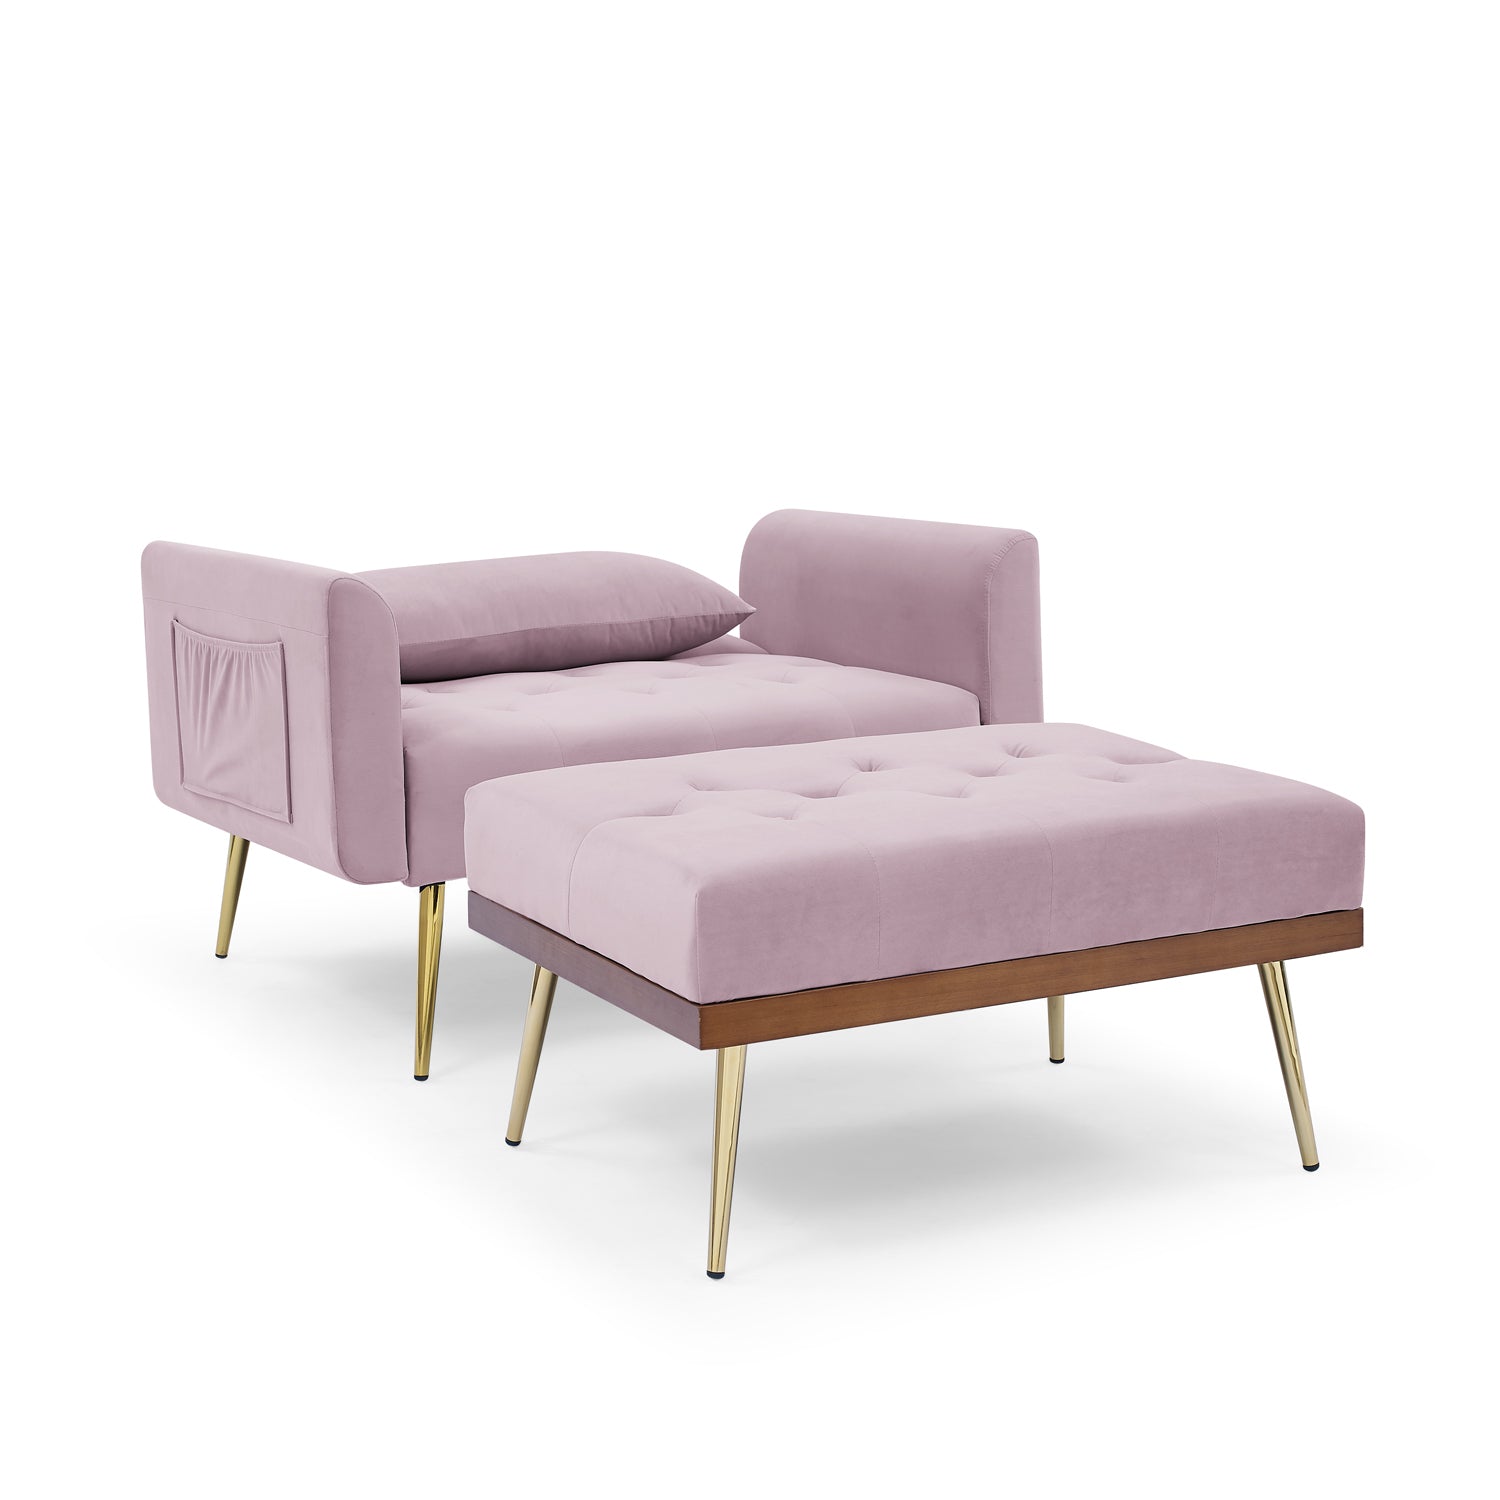 Recline Sofa Chair with Ottoman, Two Arm Pocket and Wood Frame include 1 Pillow, Pink (40.5”x33”x32”)